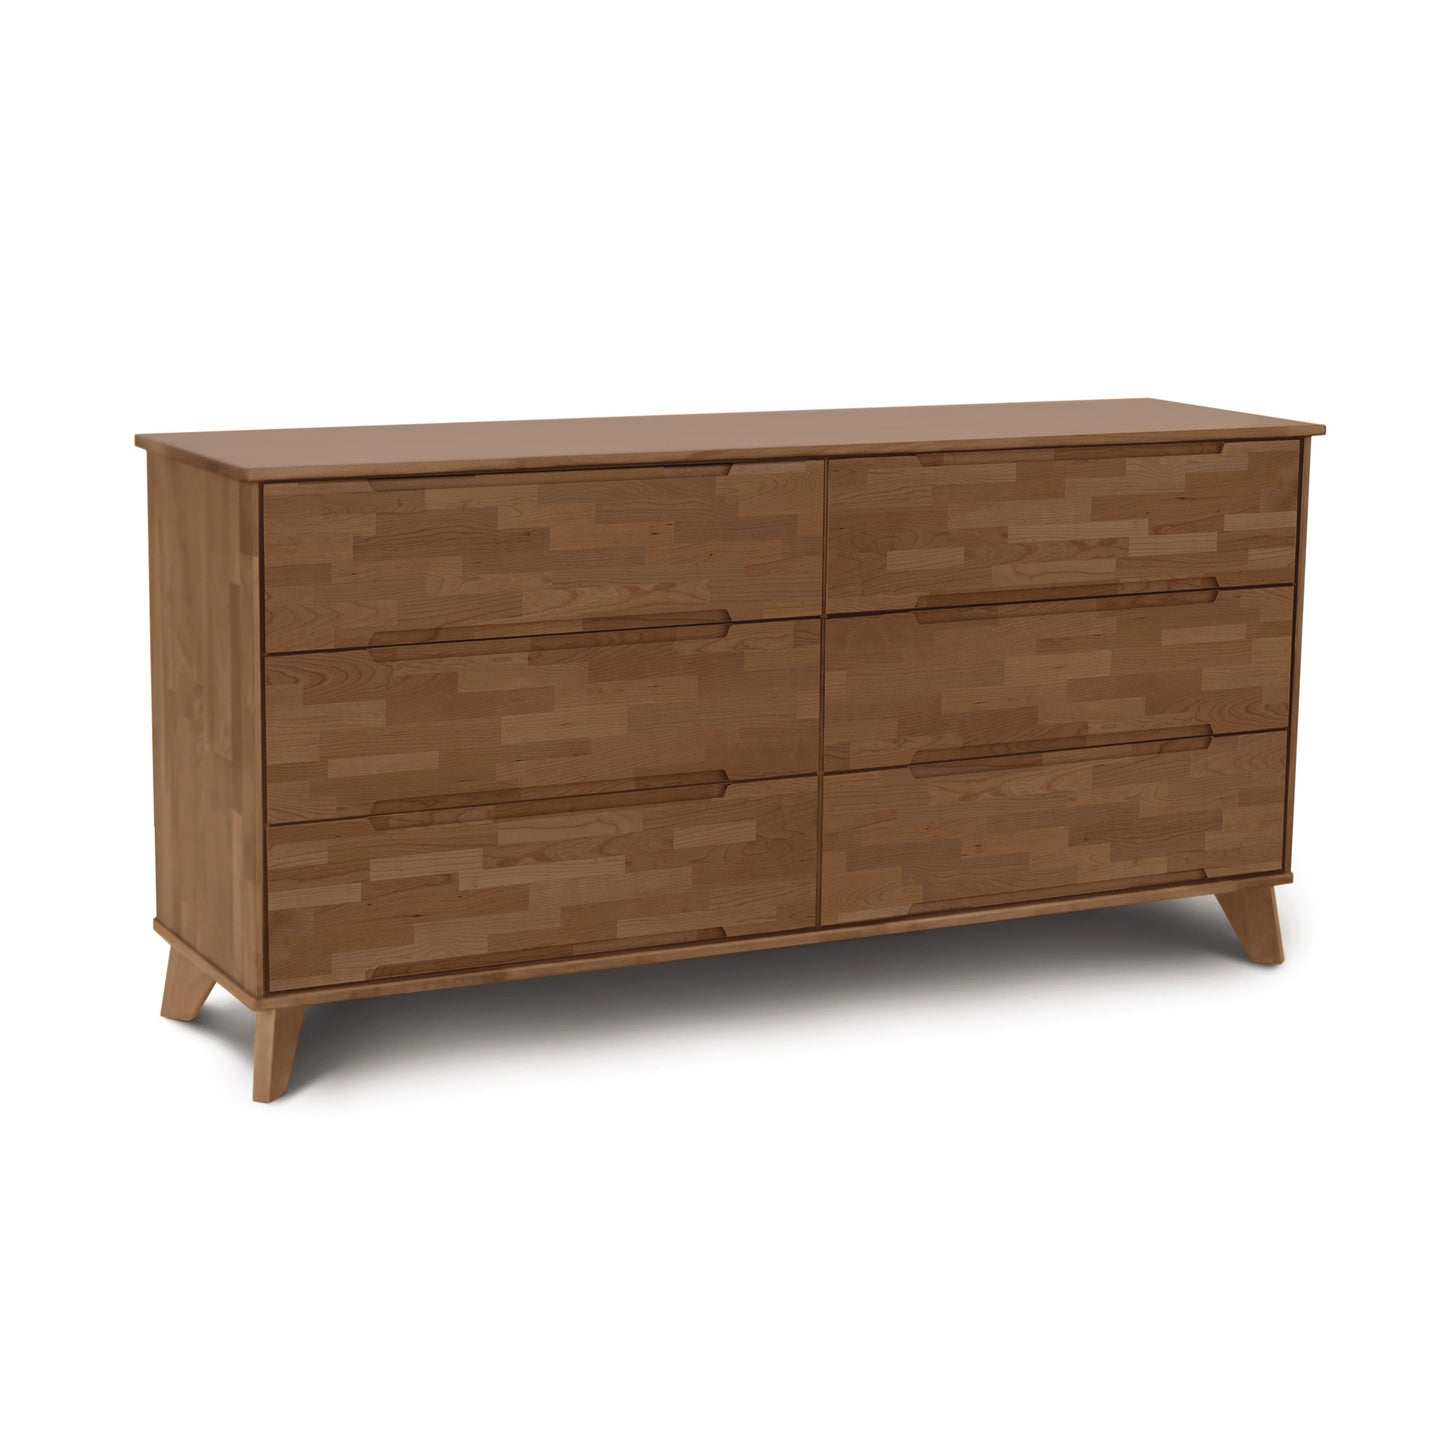 An image of the Copeland Furniture Linn 6-Drawer Dresser, a mid-century modern wooden dresser with drawers, showcasing sustainable innovation and upcycled solid wood.